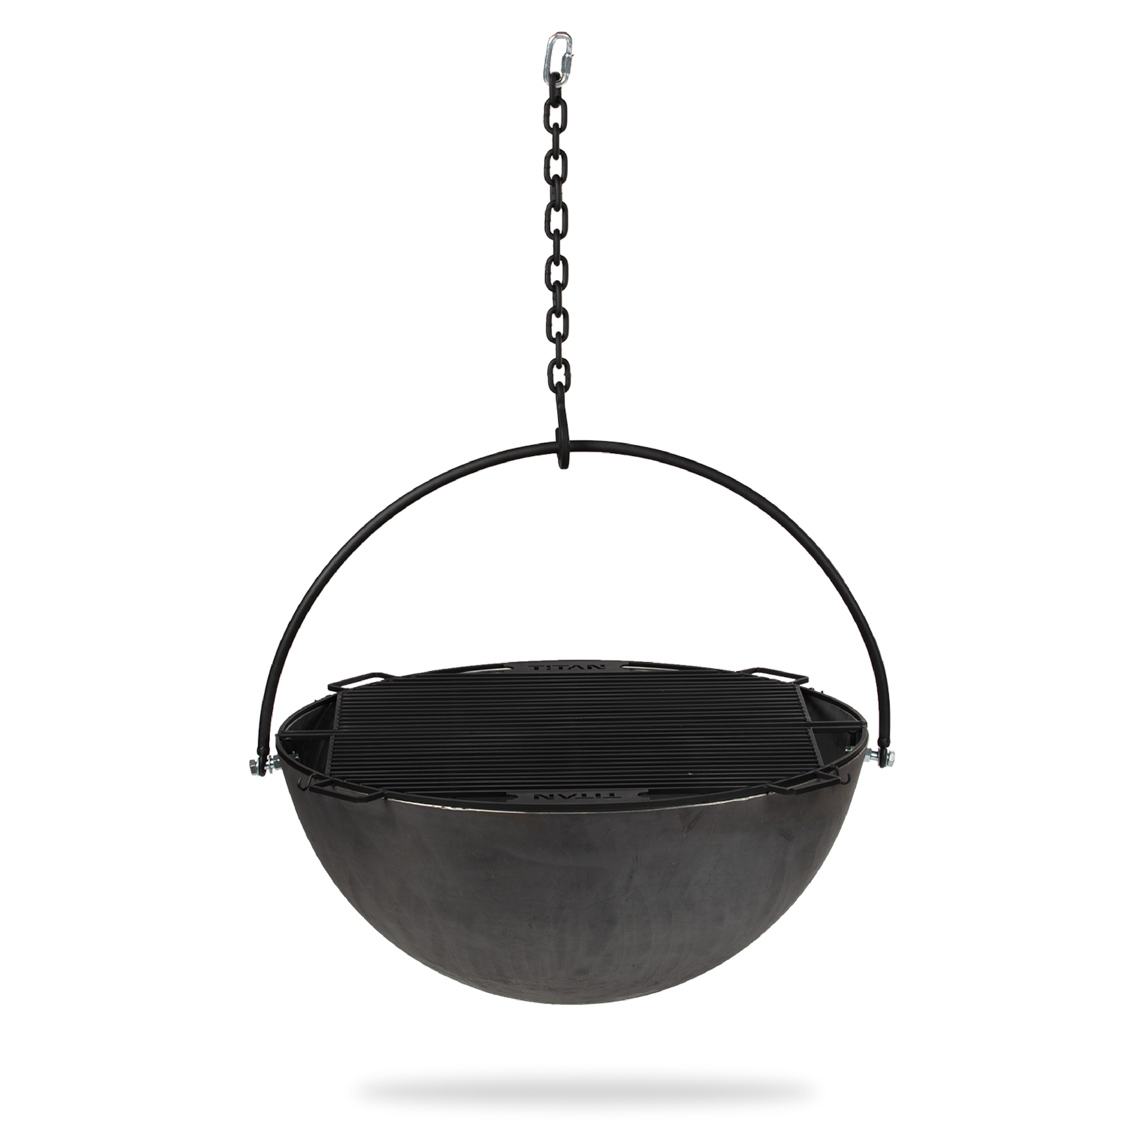 Get The 42 Cauldron Fire Pit Bowl With, Chain Fire Pit